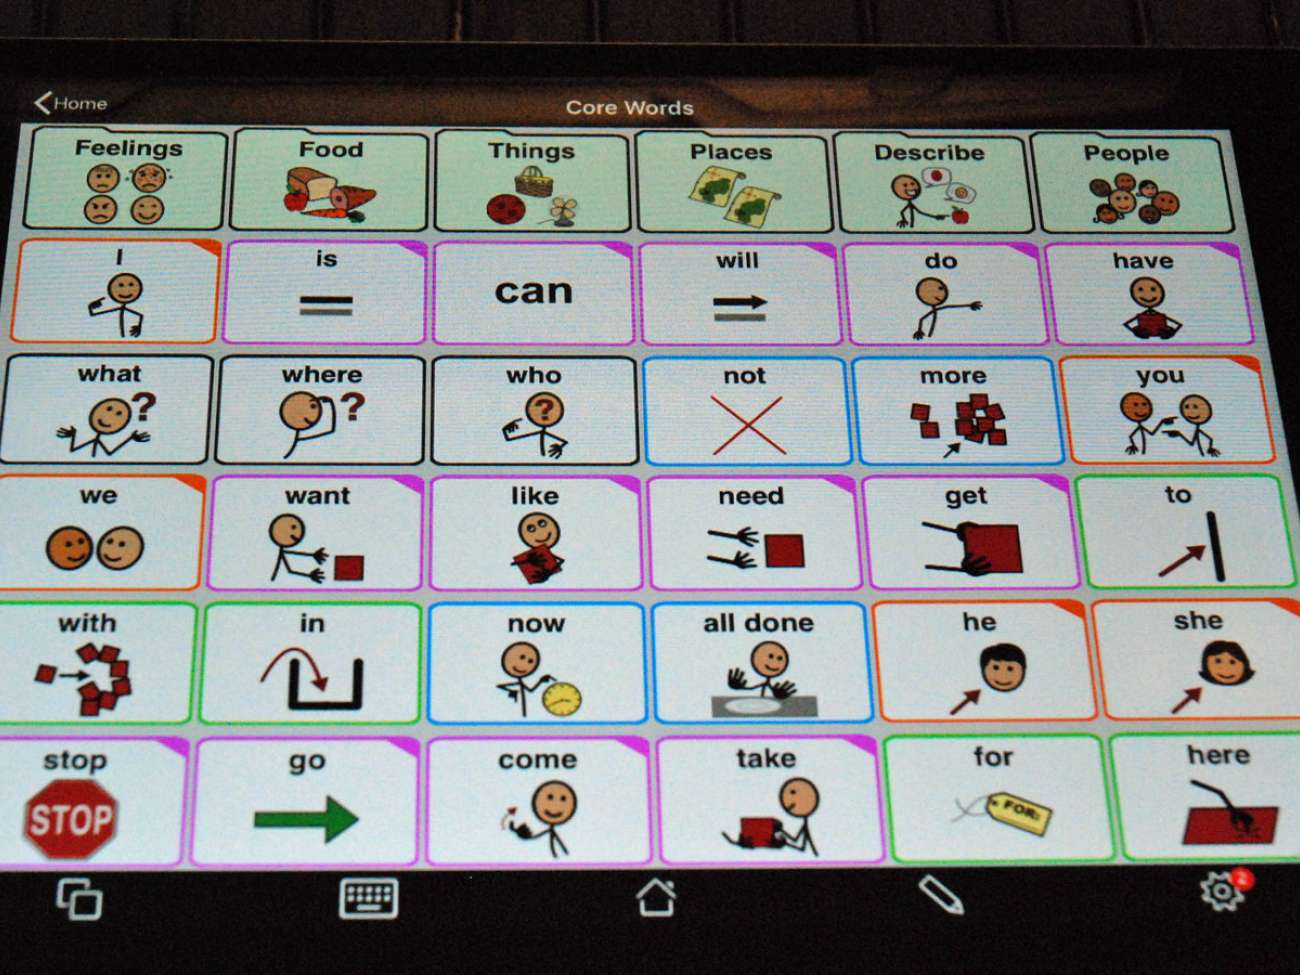 While some may prefer to type on a tablet, others would use symbols to communicate